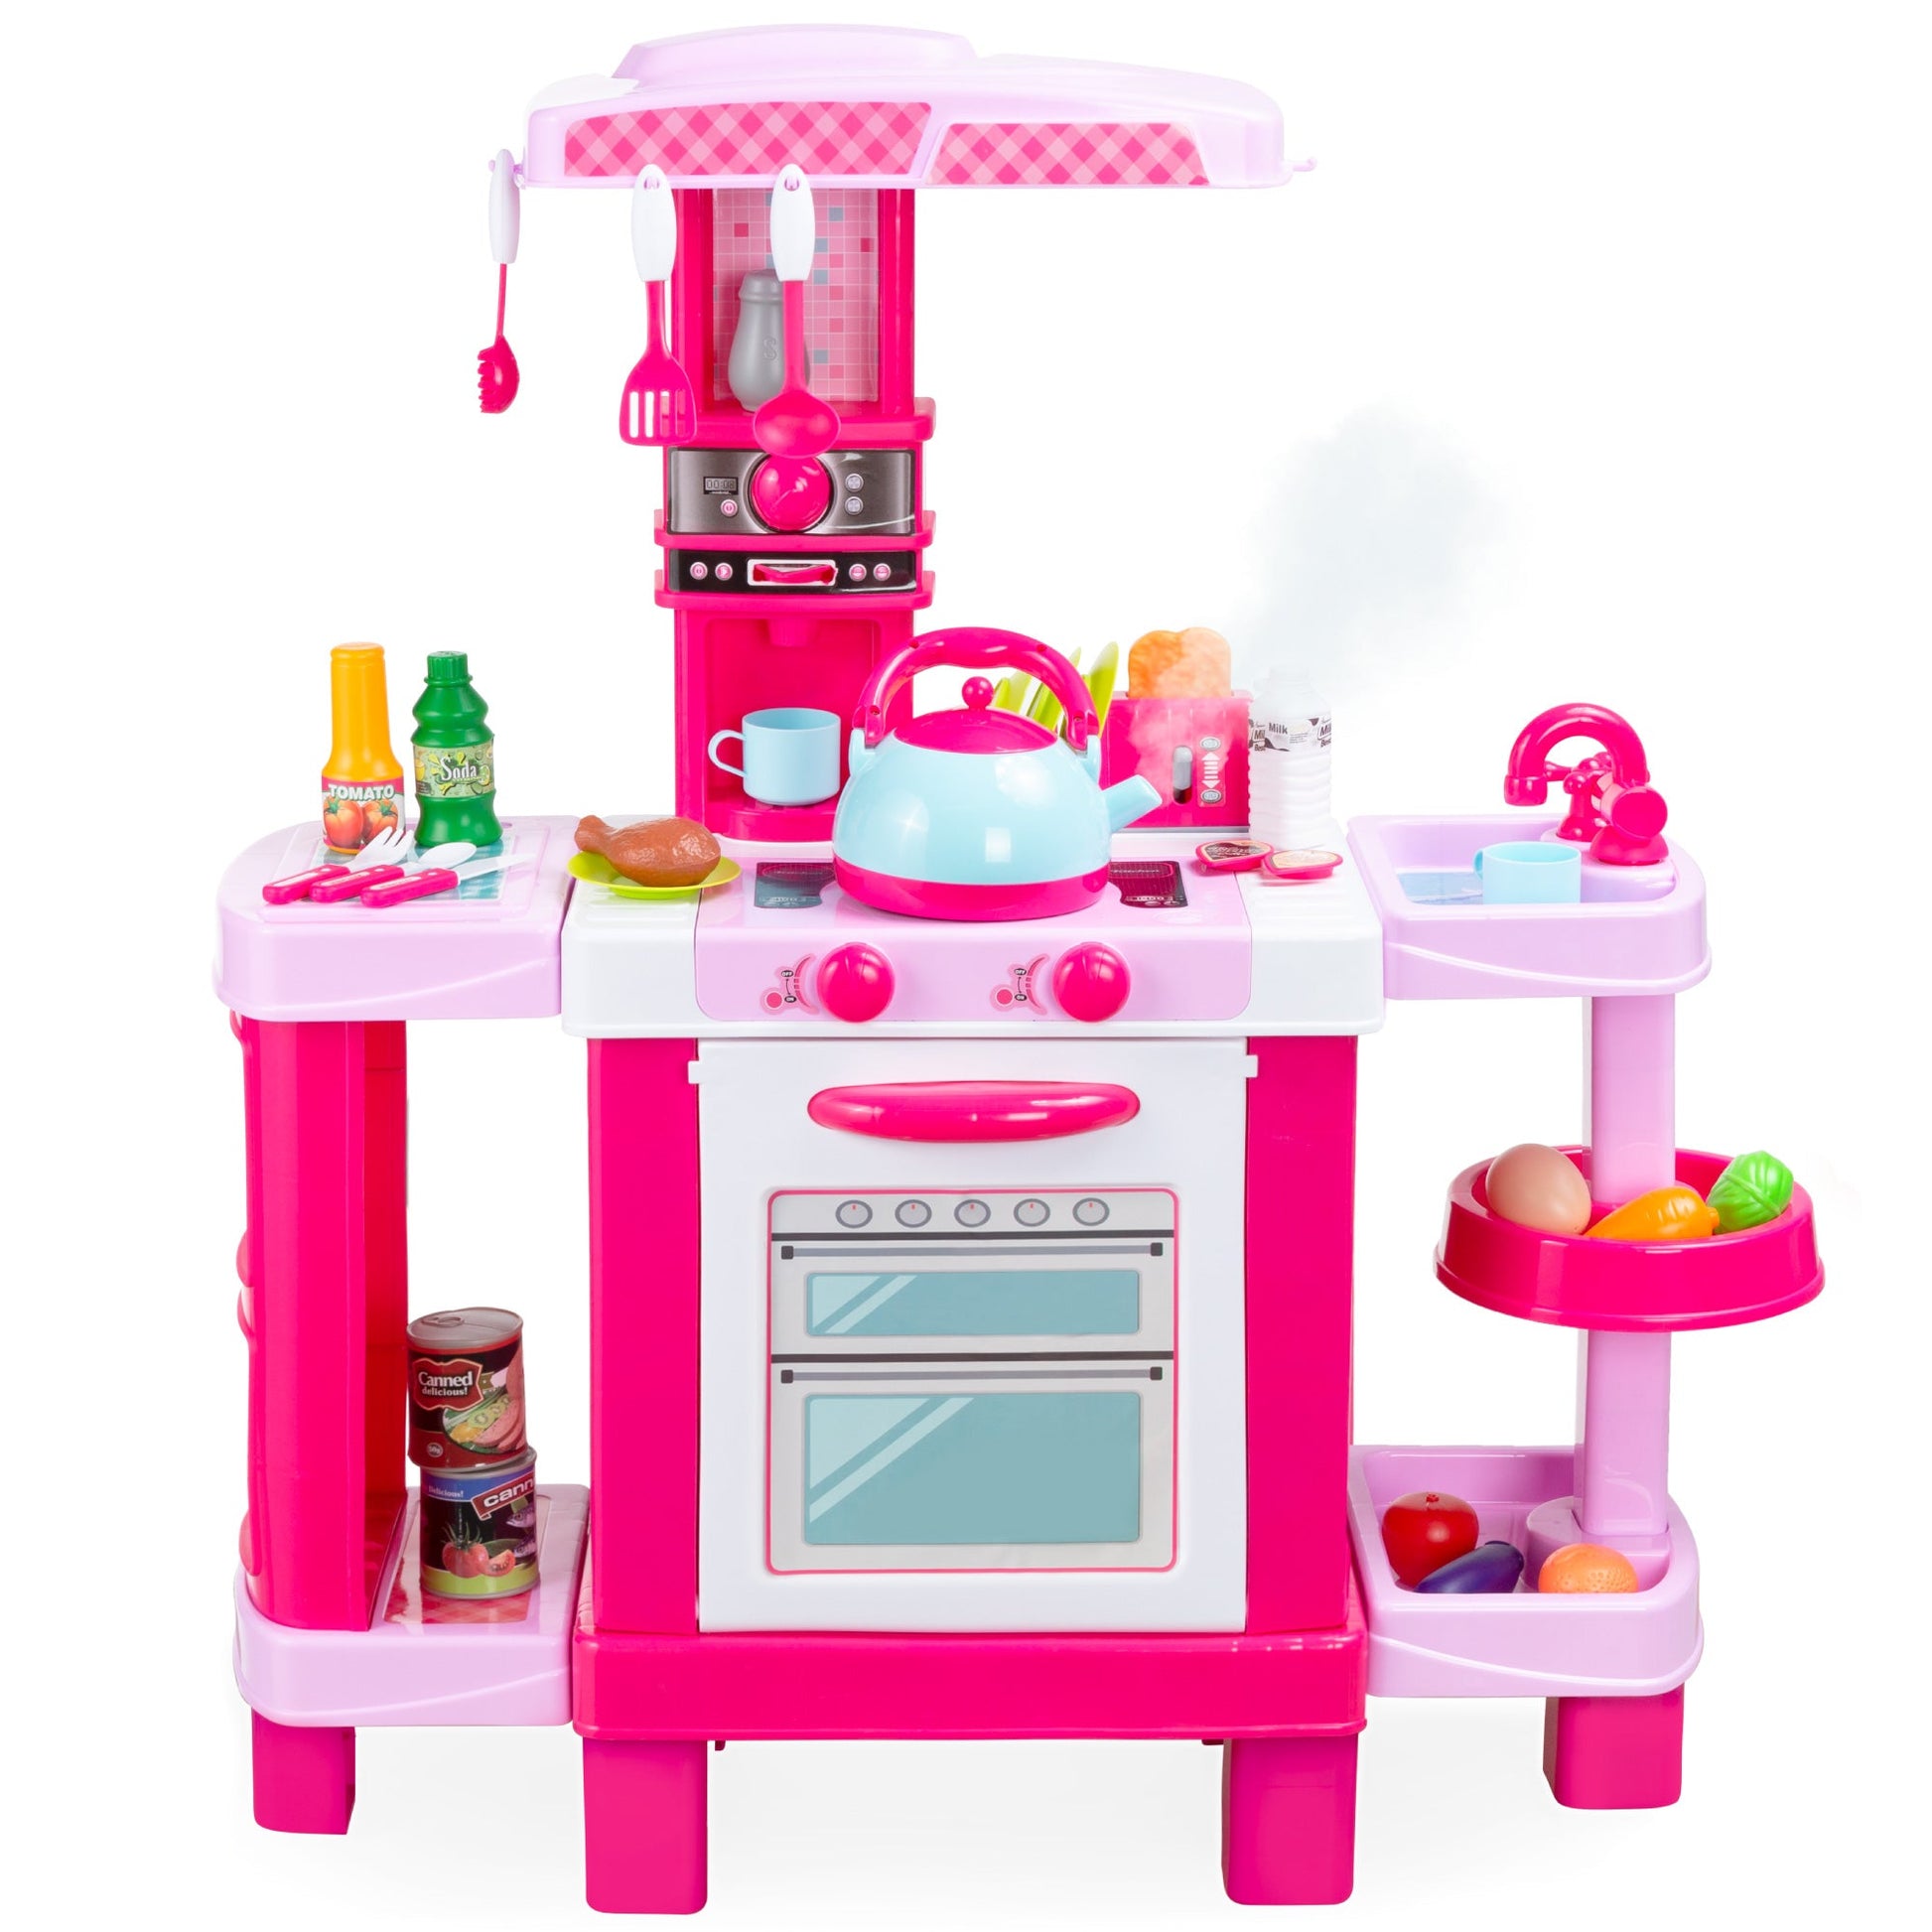 Pretend Play Kitchen Toy Set for Kids with Water Vapor Teapot